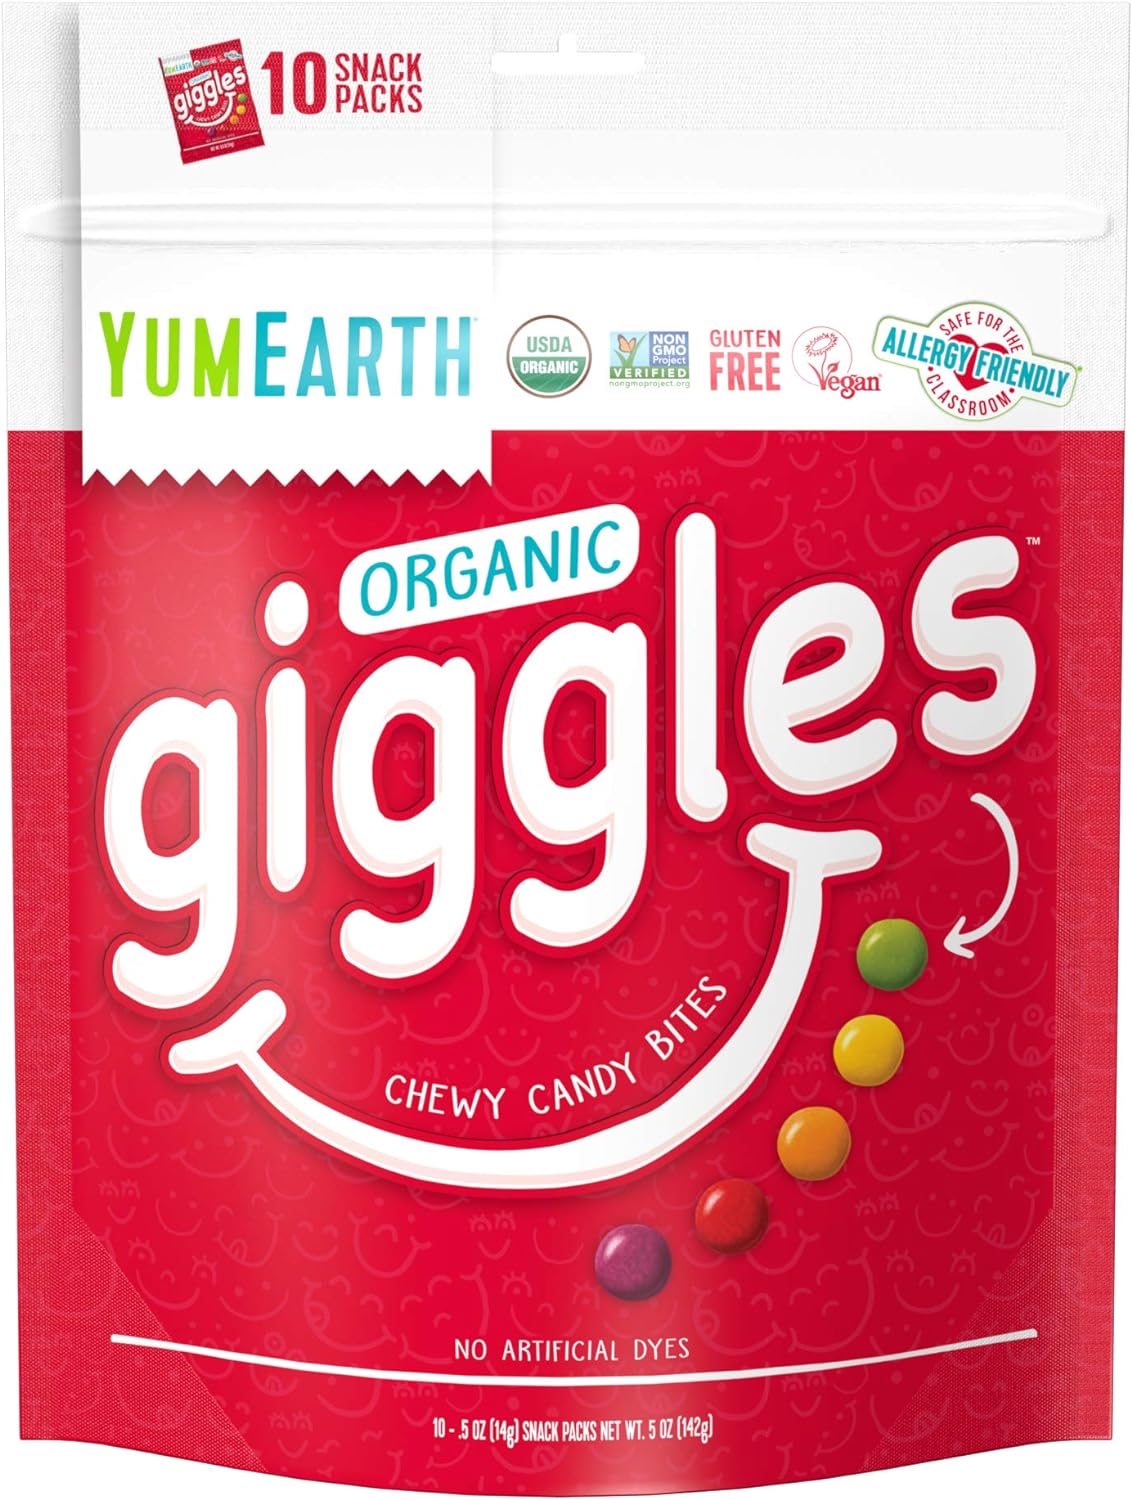 yumearth organic giggles chewy candy bites review